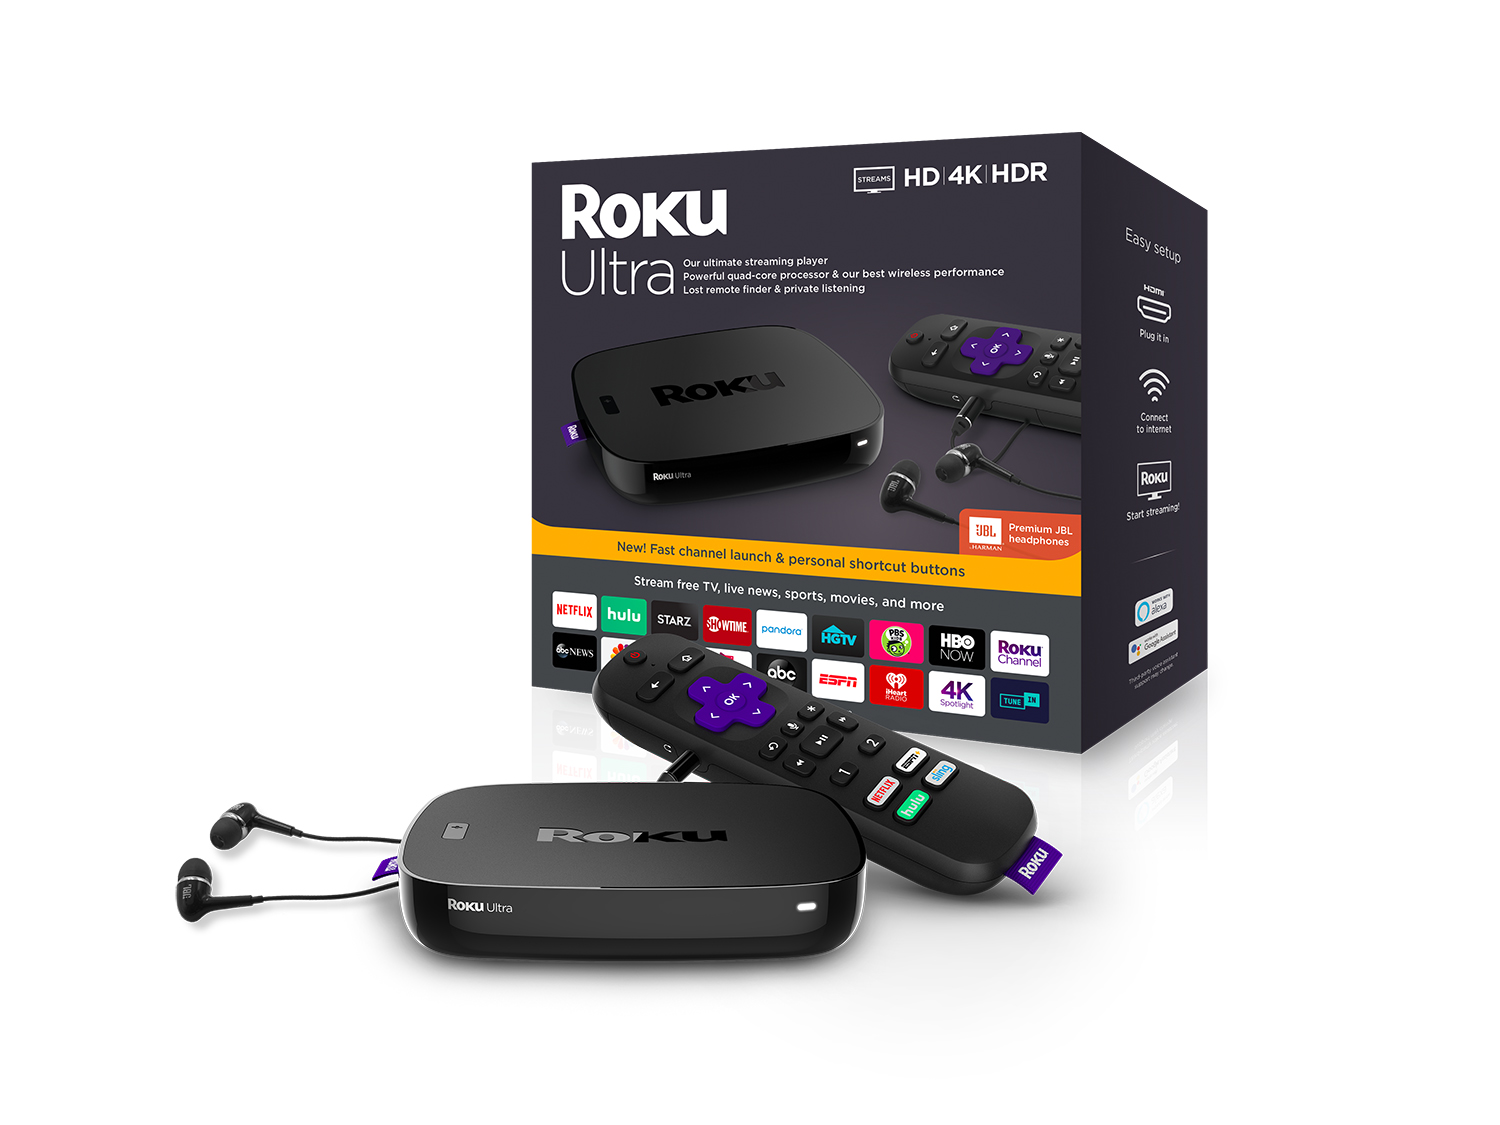 EXPIRED: The Roku Ultra is On Sale for Just $49 For Cyber Monday